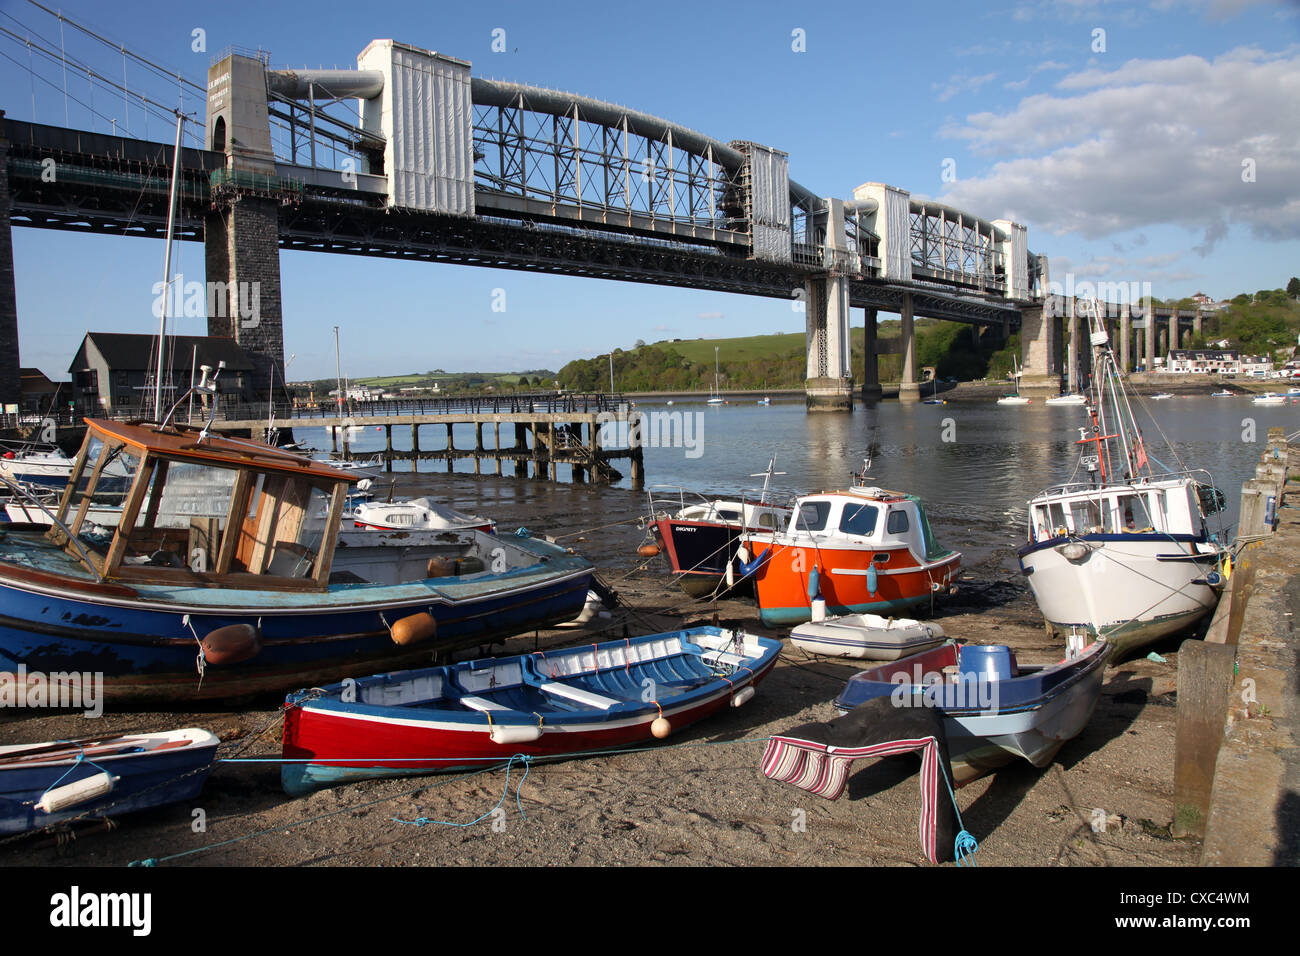 Boats on the beach at Saltash on the Cornish side of Brunel's bridge between Devon and Cornwall over the Tamar River, Cornwall Stock Photo